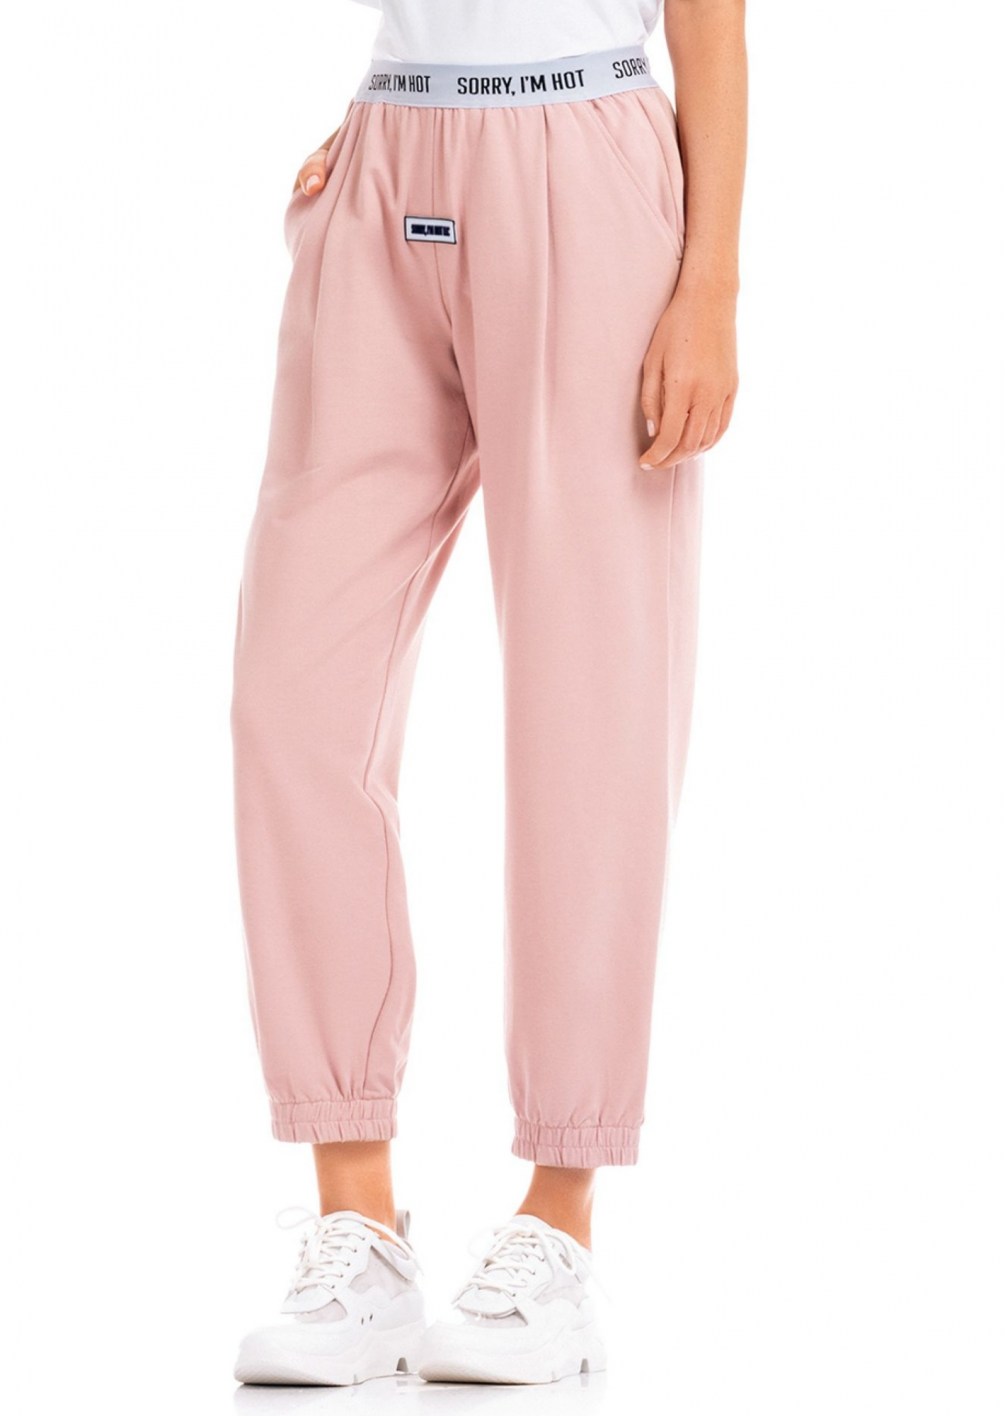 SORRY I AM NOT Pink Basic Track Pants | THE-PRIVATE-LABEL.COM